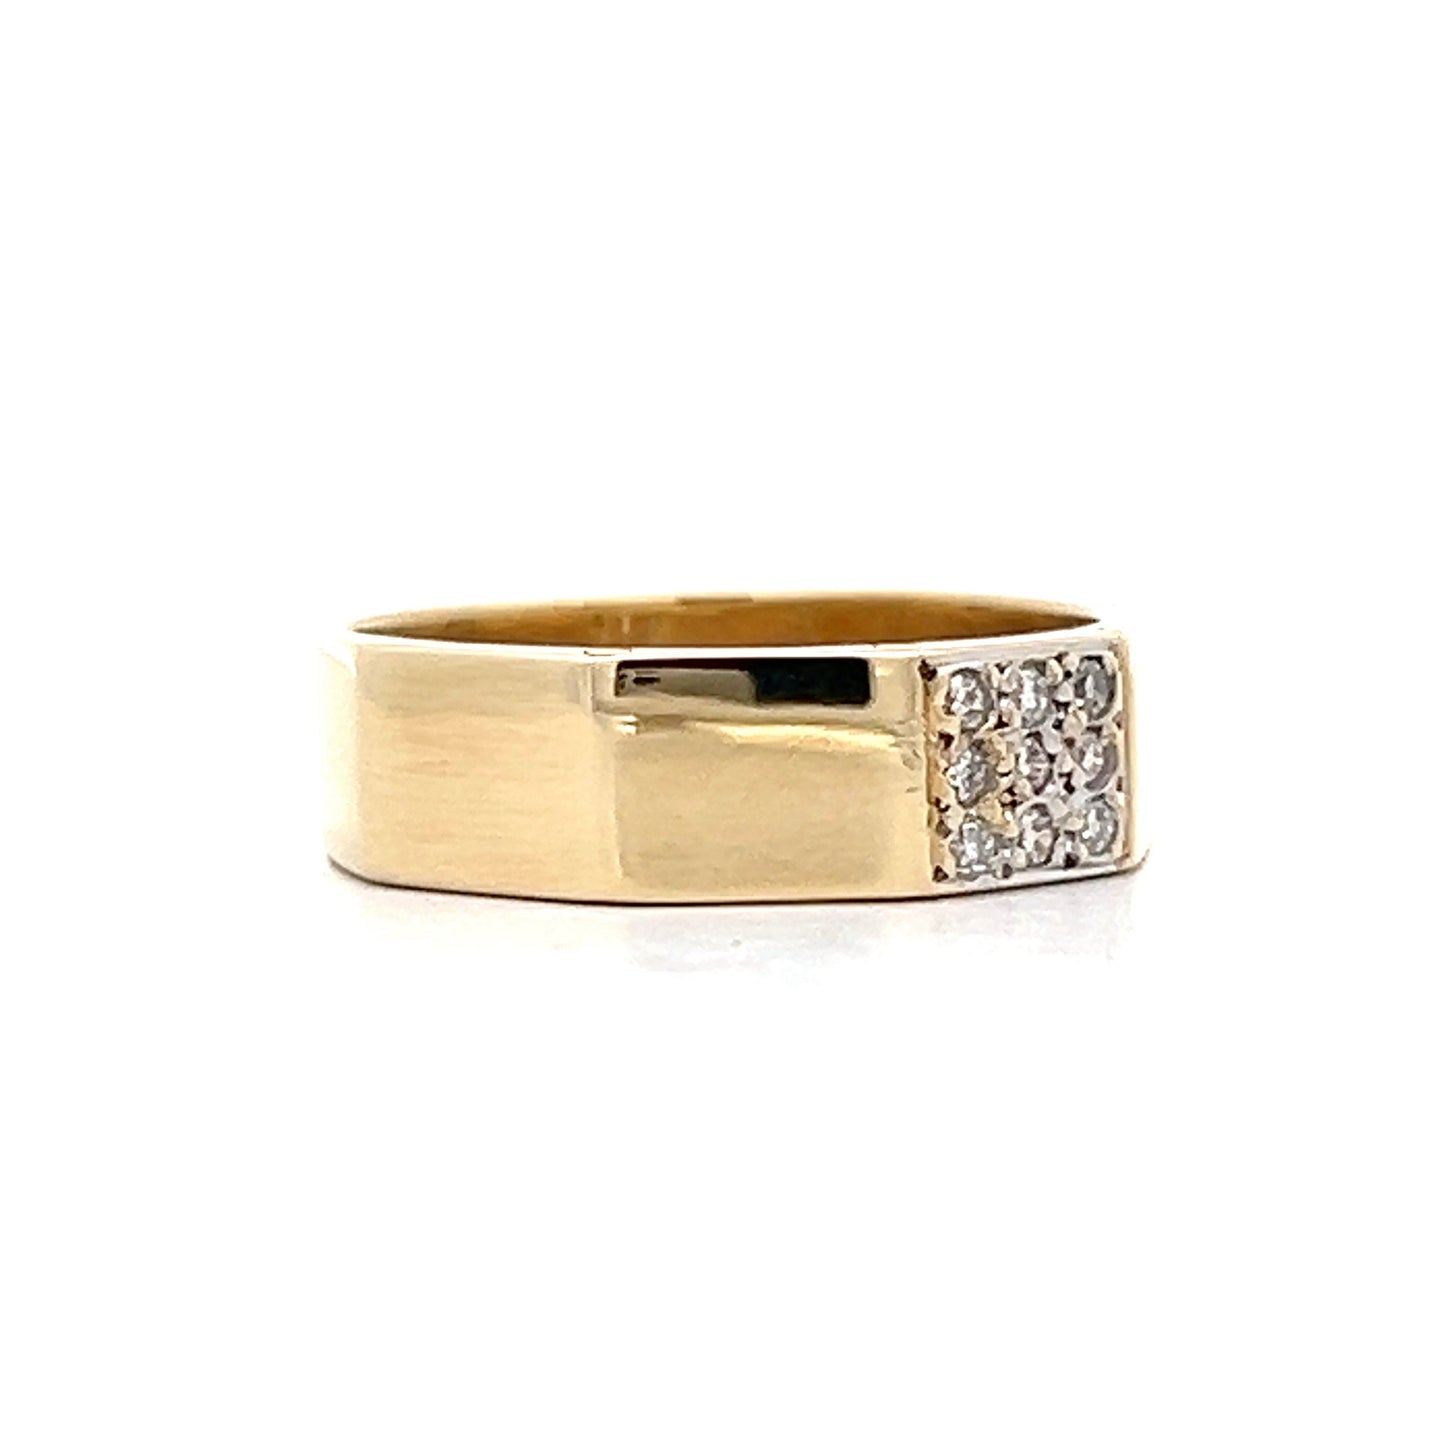 Octagonal Pave Diamond Stackable Ring in 14k Yellow Gold